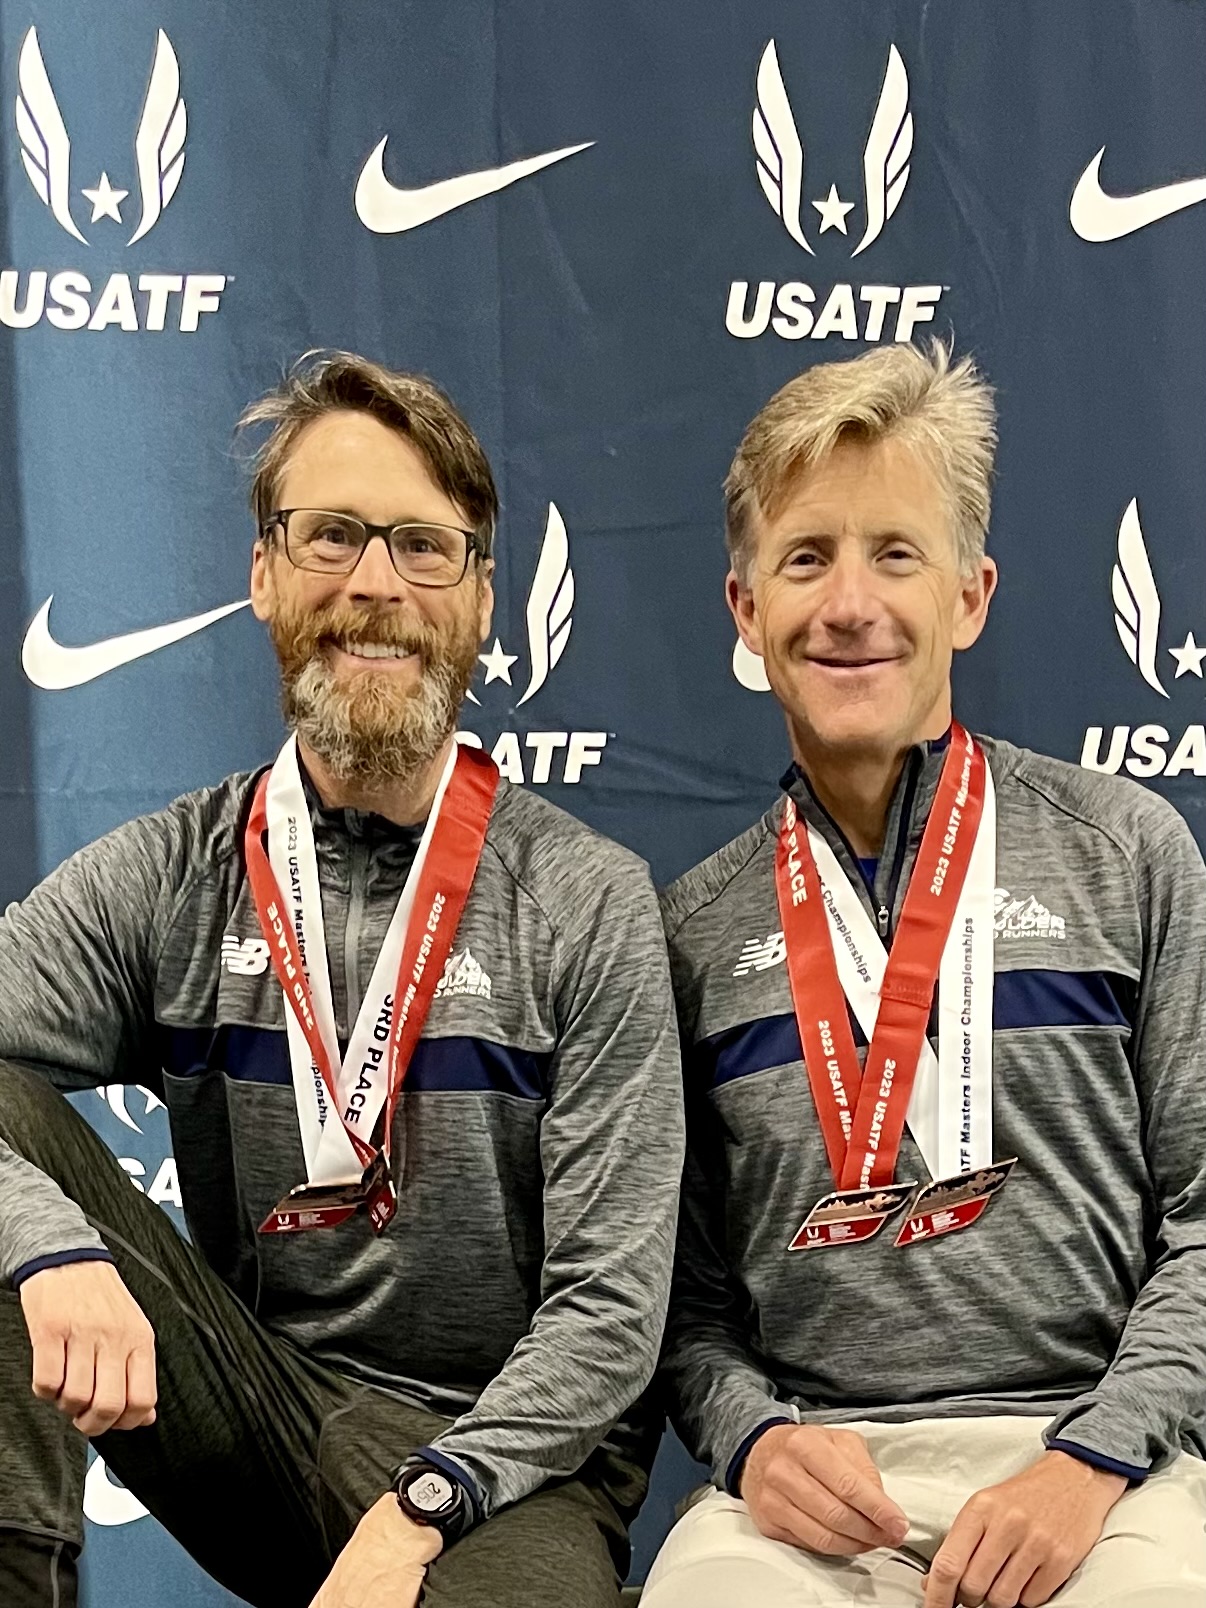 Boulder Road Runners Todd Straka, left, and Chris McDonald are racing the Masters Exhibition 800 meters Sunday at the U.S. Olympic Trials. The friends and sometimes training partners are among the eight runners from around the nation invited to participate. (Courtesy photo)